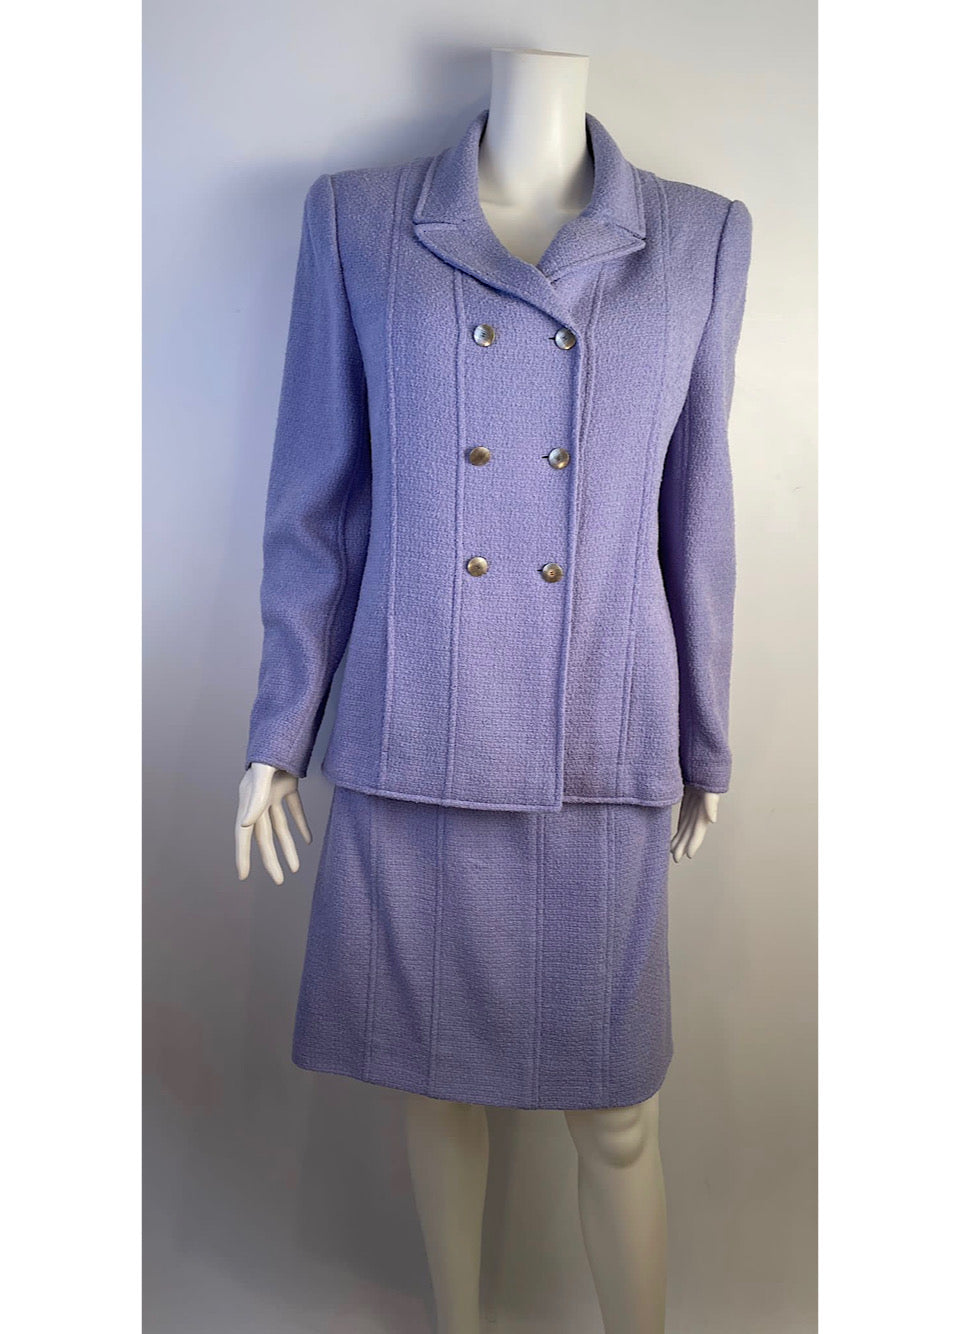 HelensChanel Rare Chanel 98P 1998 Spring Vintage Lilac Double Breasted Jacket Skirt Suit FR 44 US 10